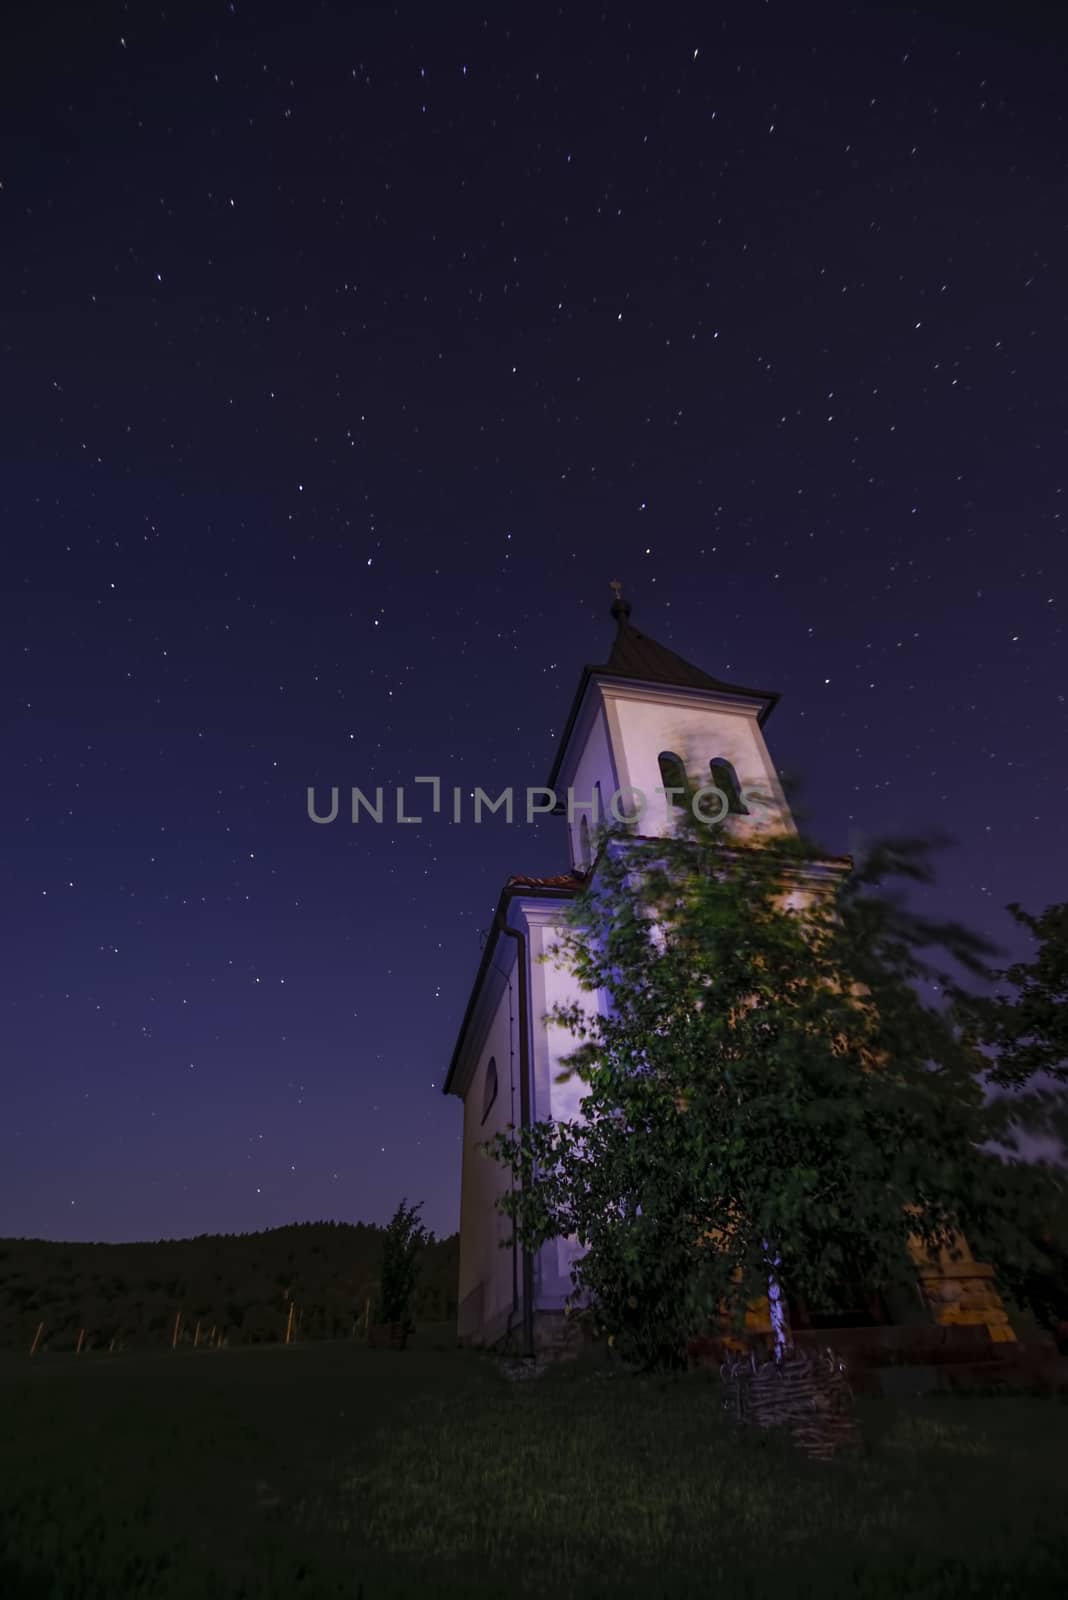 Church in clear, starry night with Ursa Maior - Big bear to the left and Polaris - North star to the right